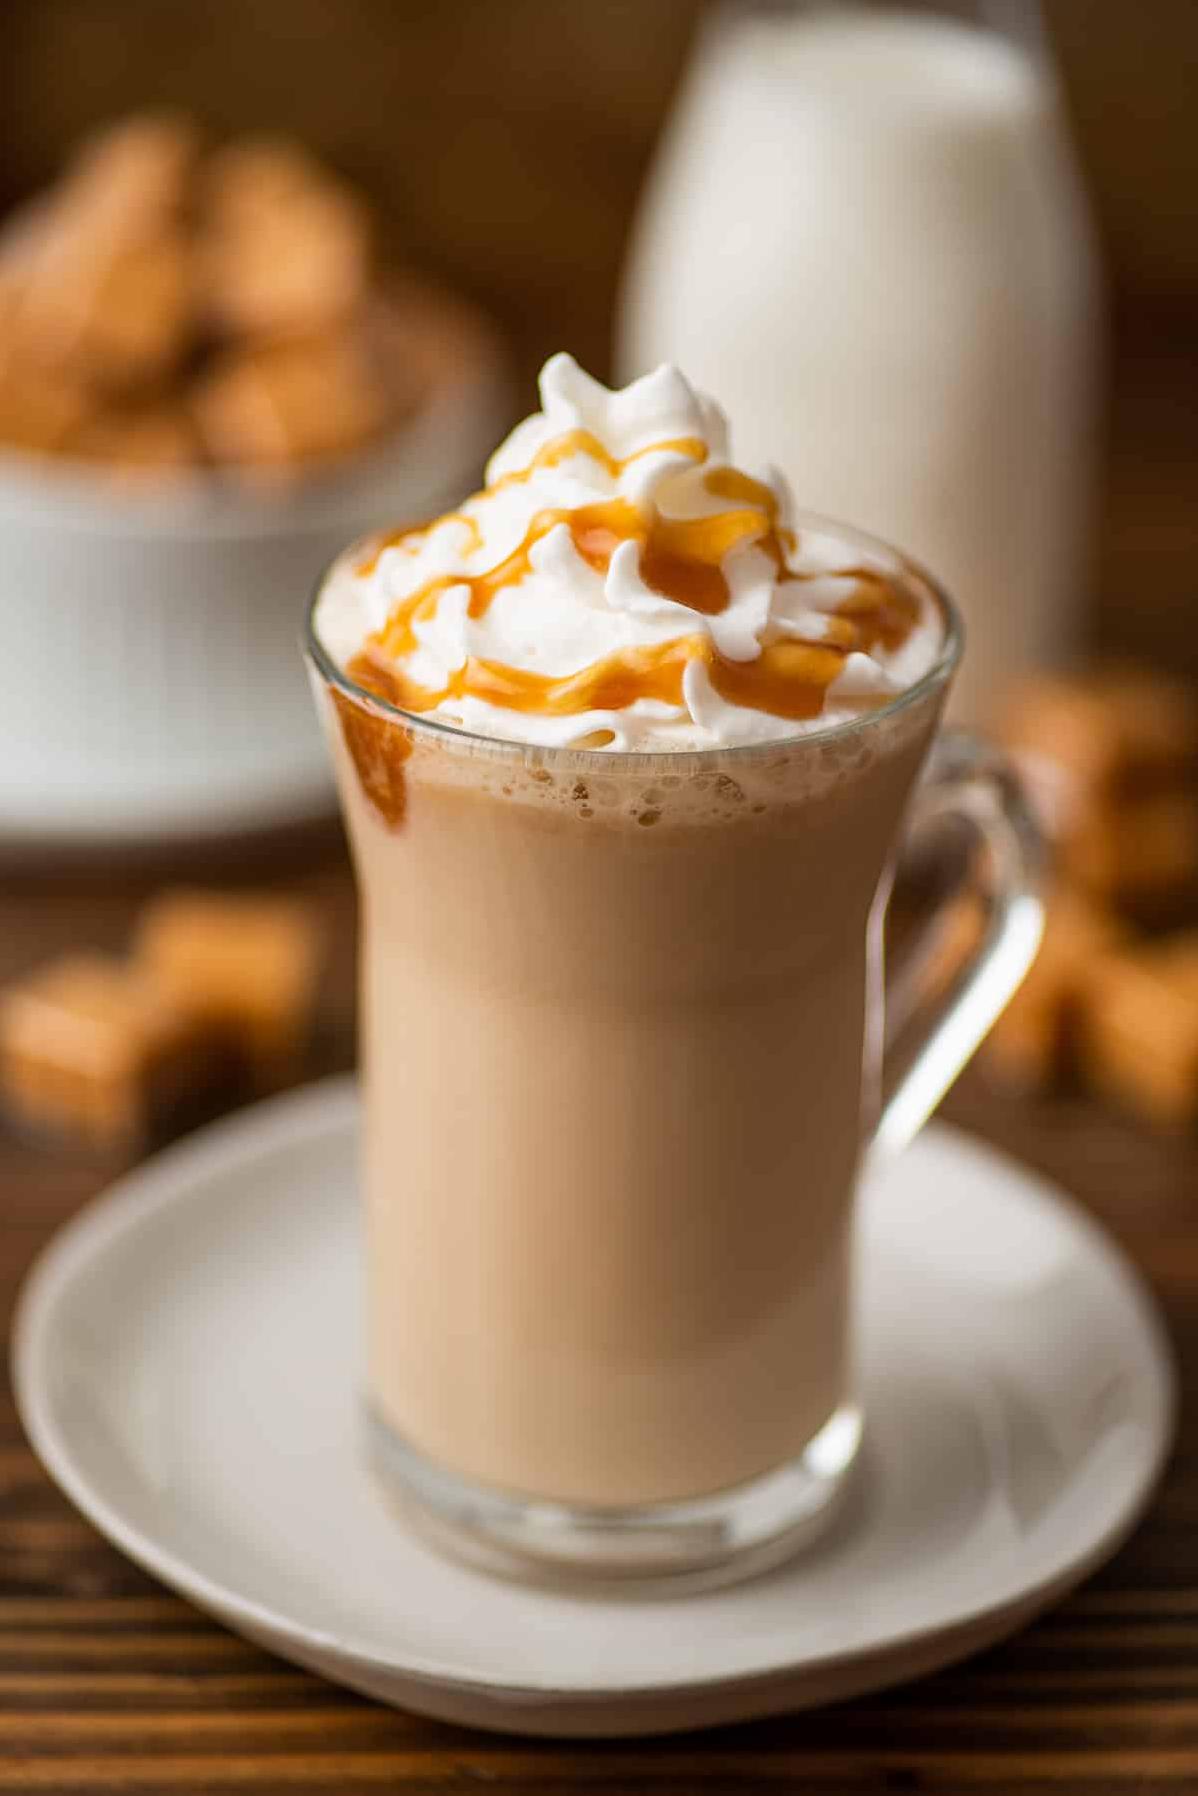  A blend of espresso and sweet caramel, this latte will awaken your senses and satisfy your cravings.